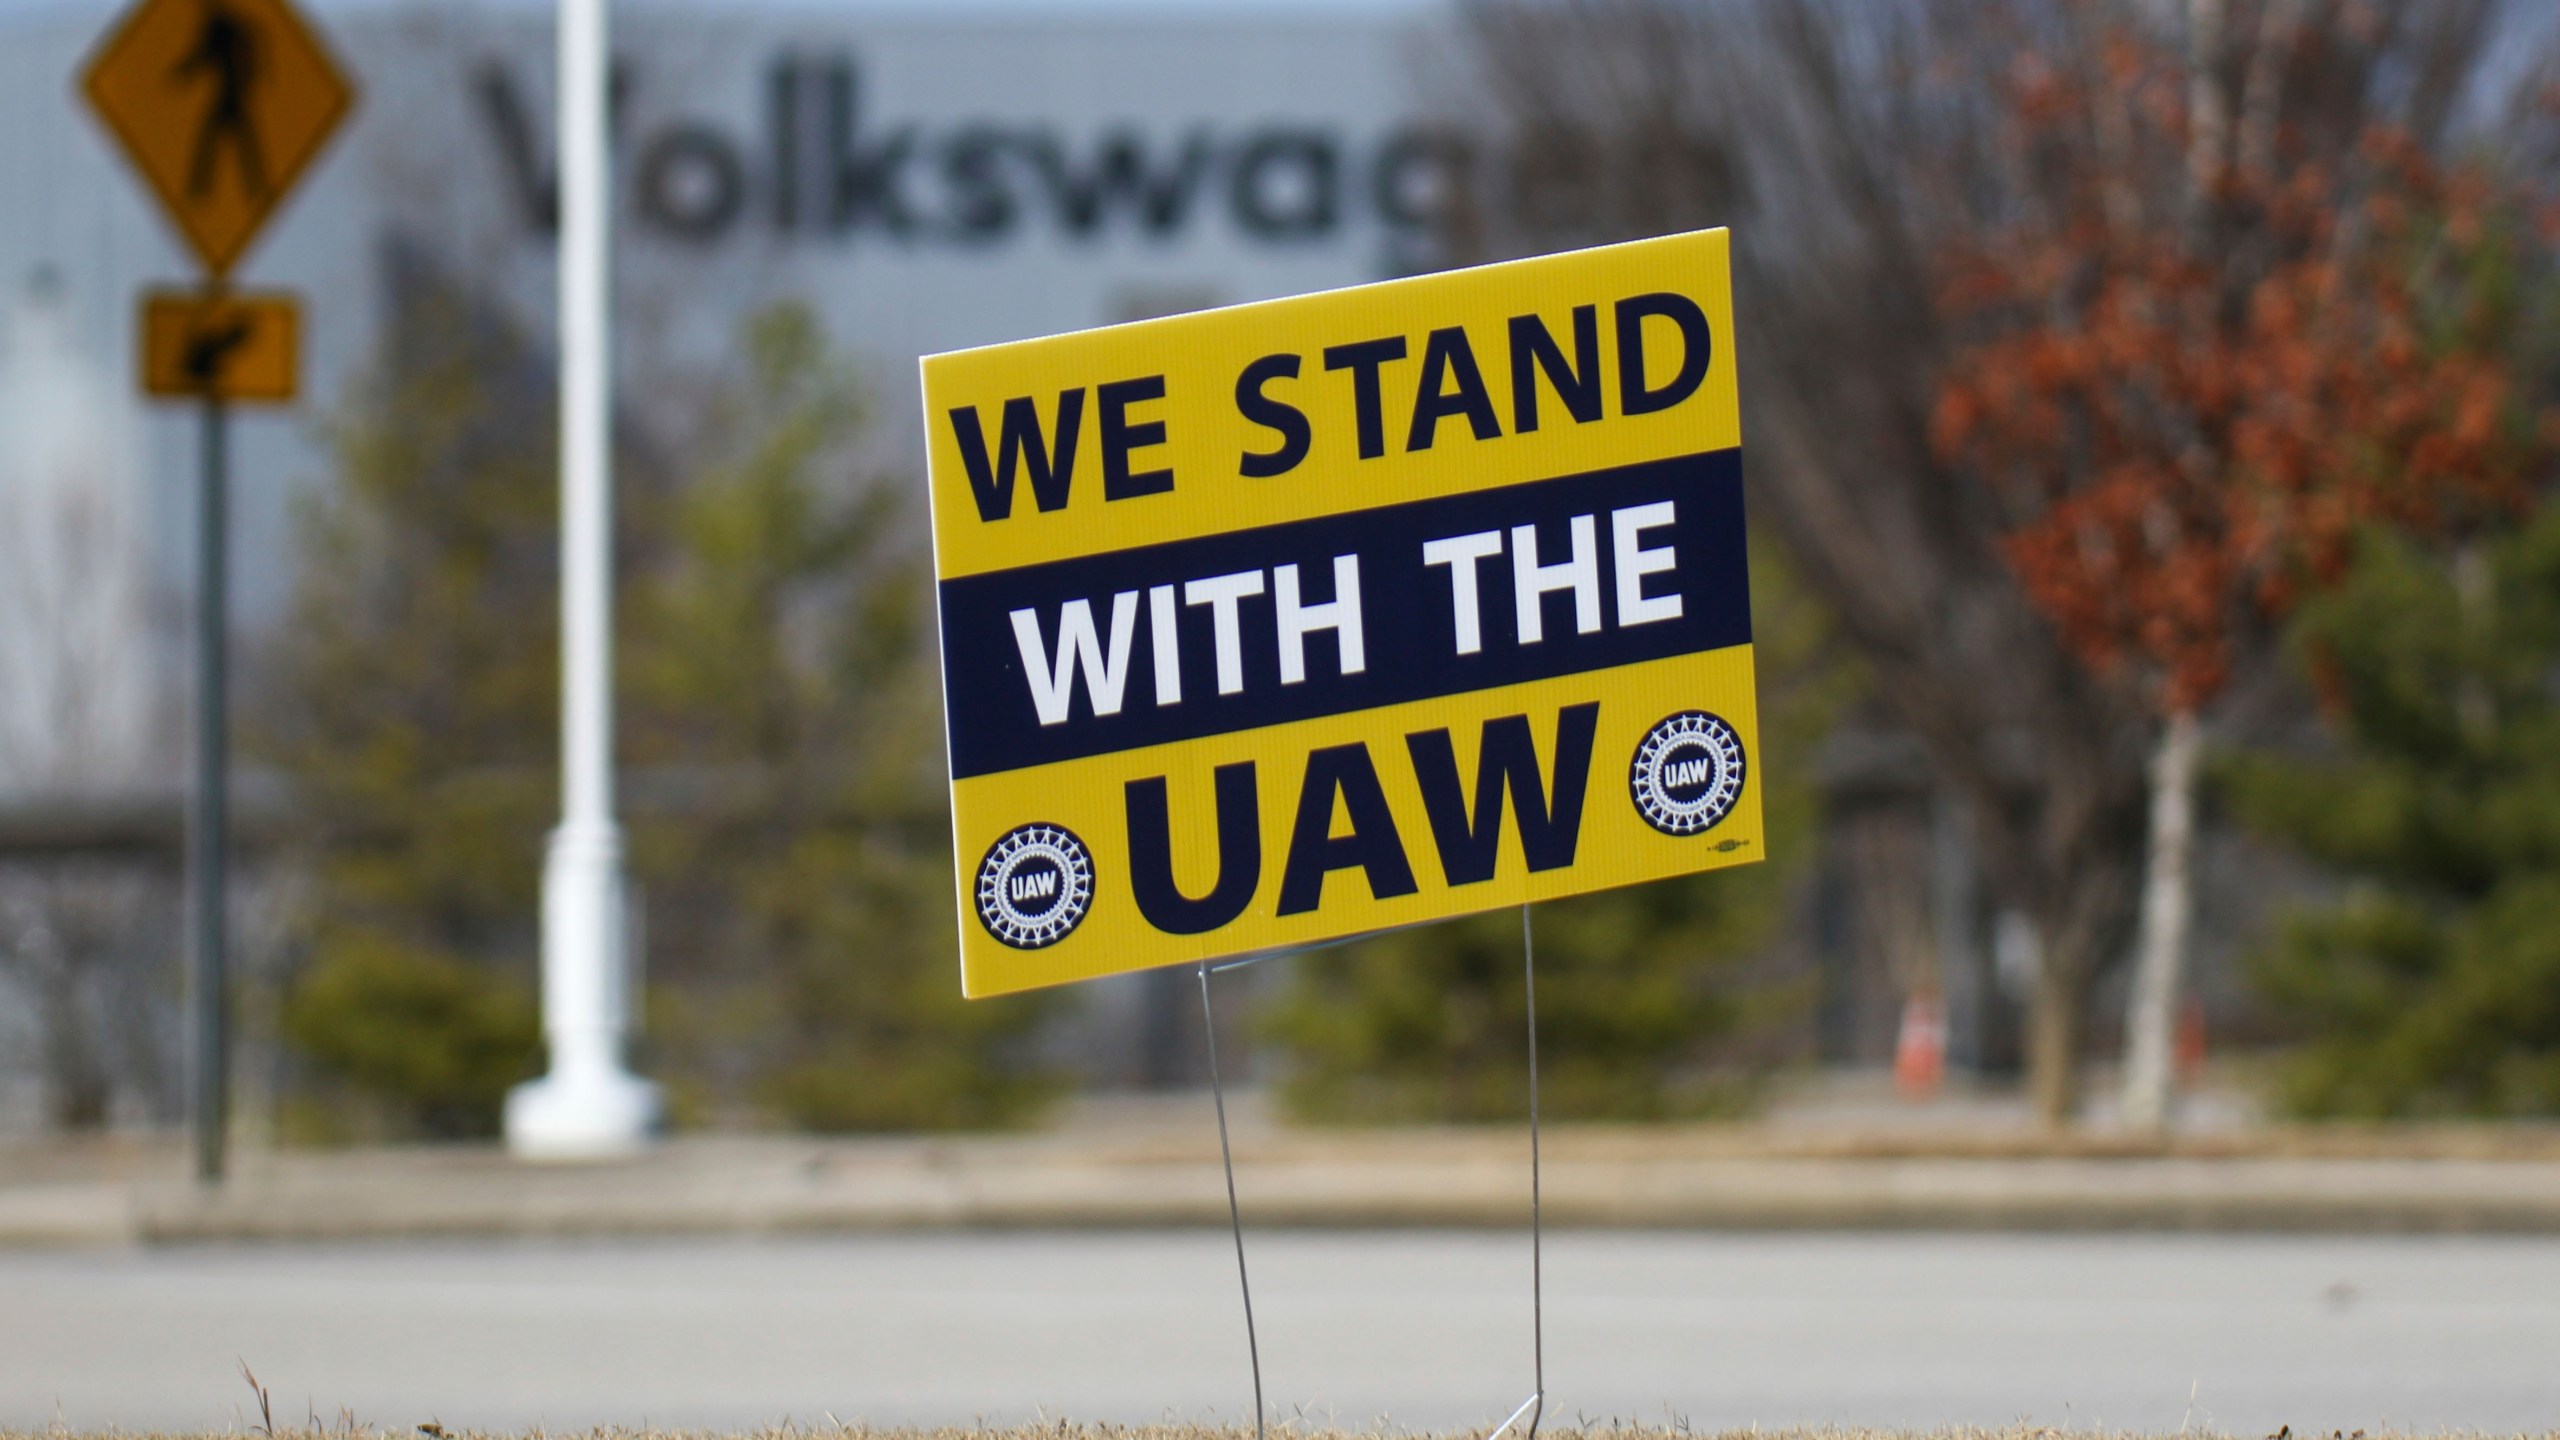 A "We stand with the UAW" sign is placed outside of the Volkswagen plant in Chattanooga, Tenn., on Dec. 18, 2023. Volkswagen’s factory in Chattanooga is likely to be the first test of the United Auto Workers’ effort to organize nonunion automobile plants across the nation. The union said workers at the factory filed paperwork Monday, March 18, 2024 with the National Labor Relations Board seeking a union representation election. (Olivia Ross/Chattanooga Times Free Press via AP, file)